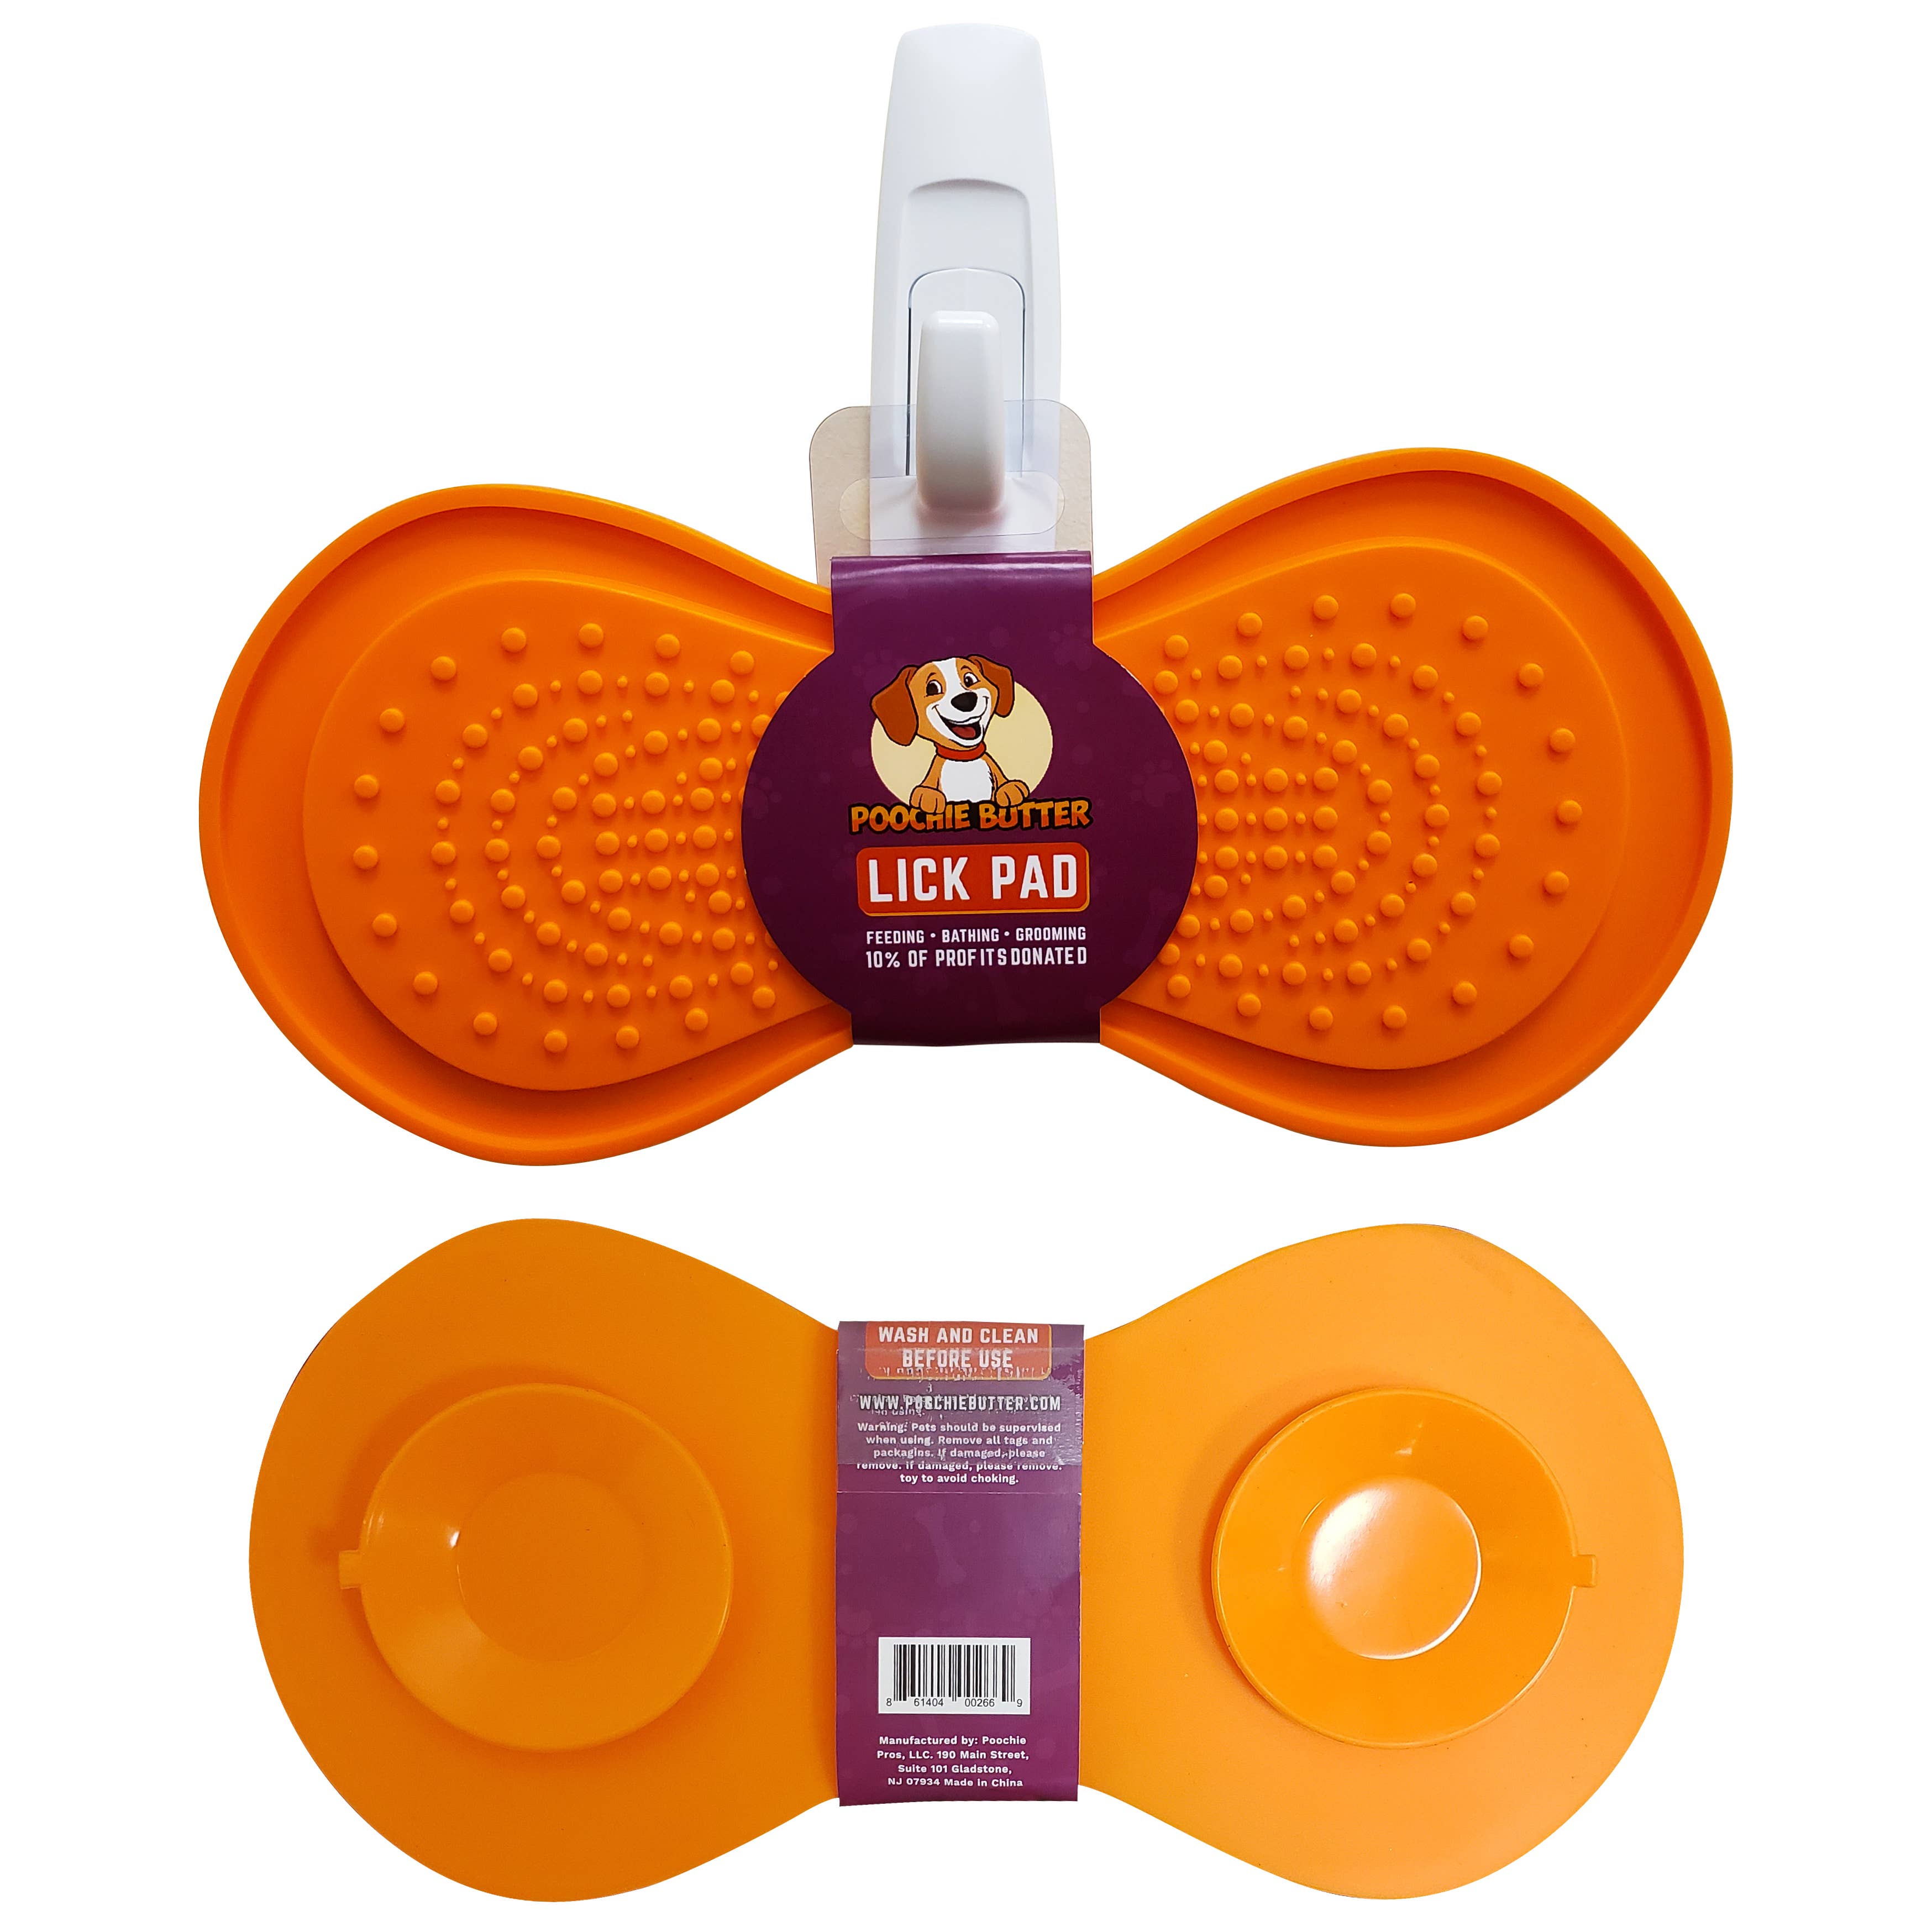 Poochie Butter Lick Pad for Peanut Butter